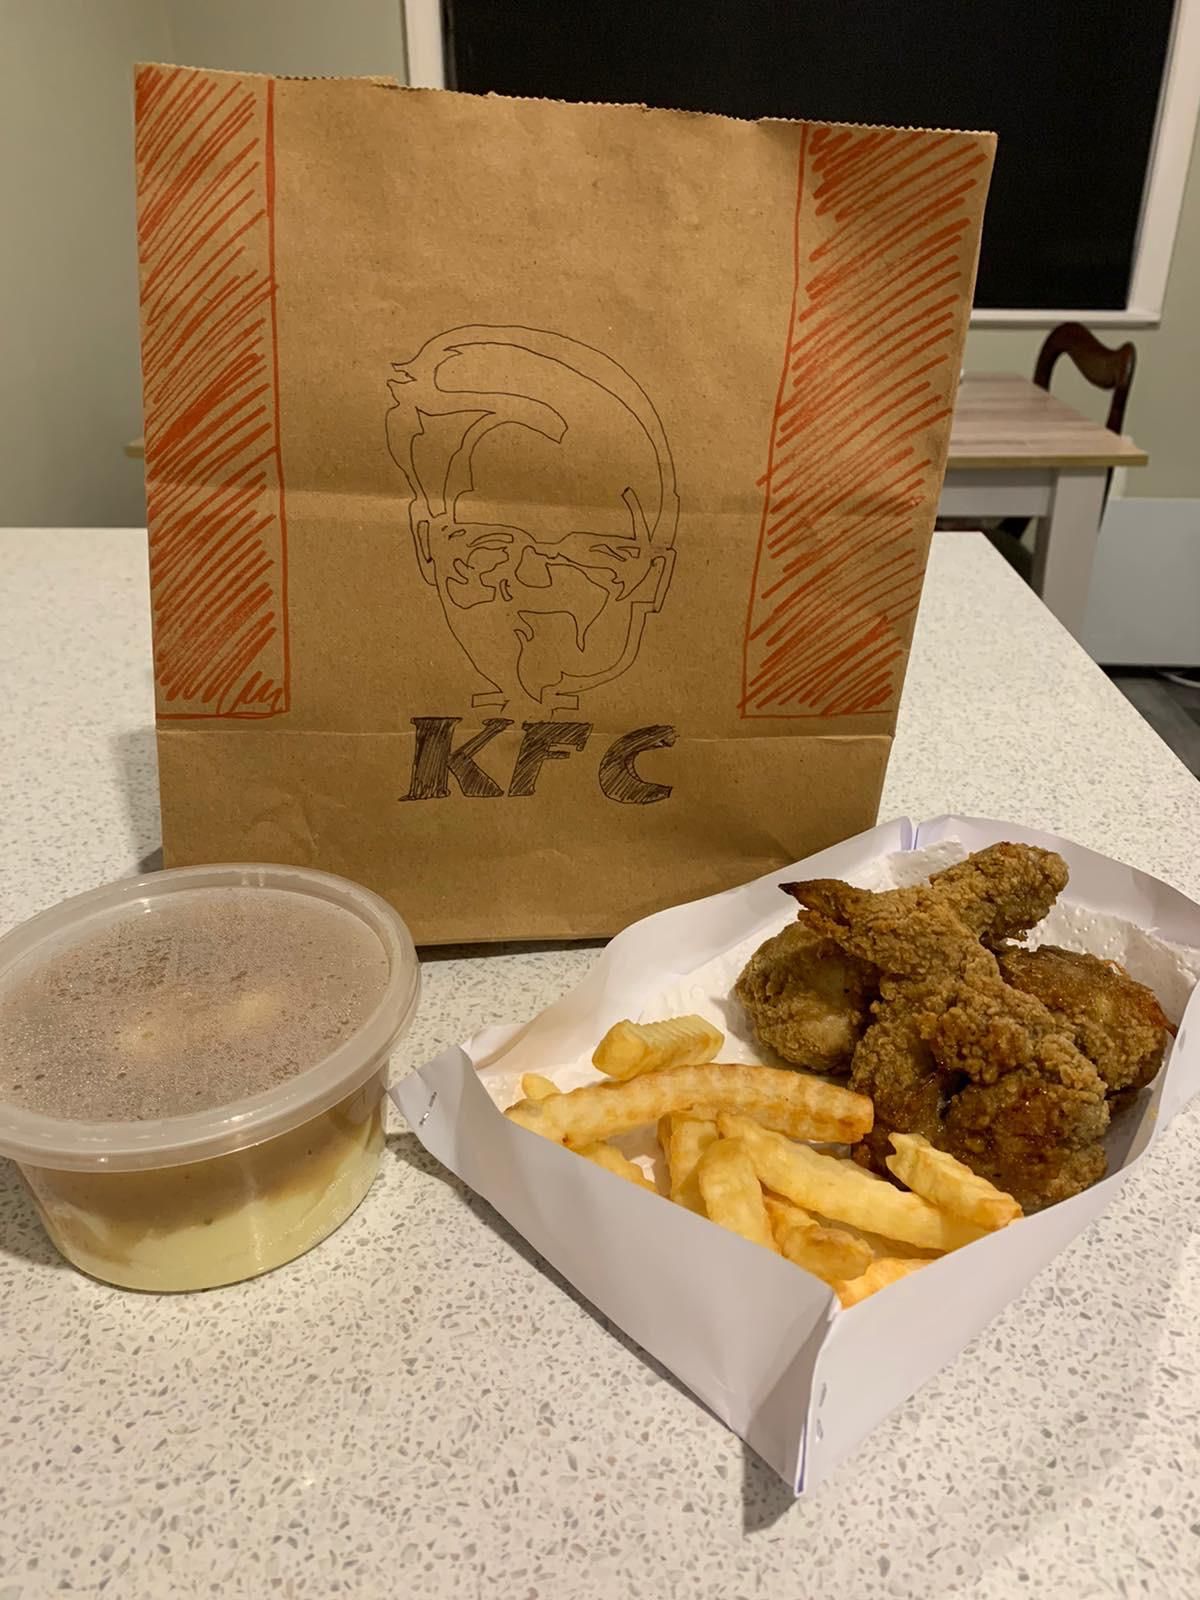 Sister made “KFC” since all takeaway stores are closed.